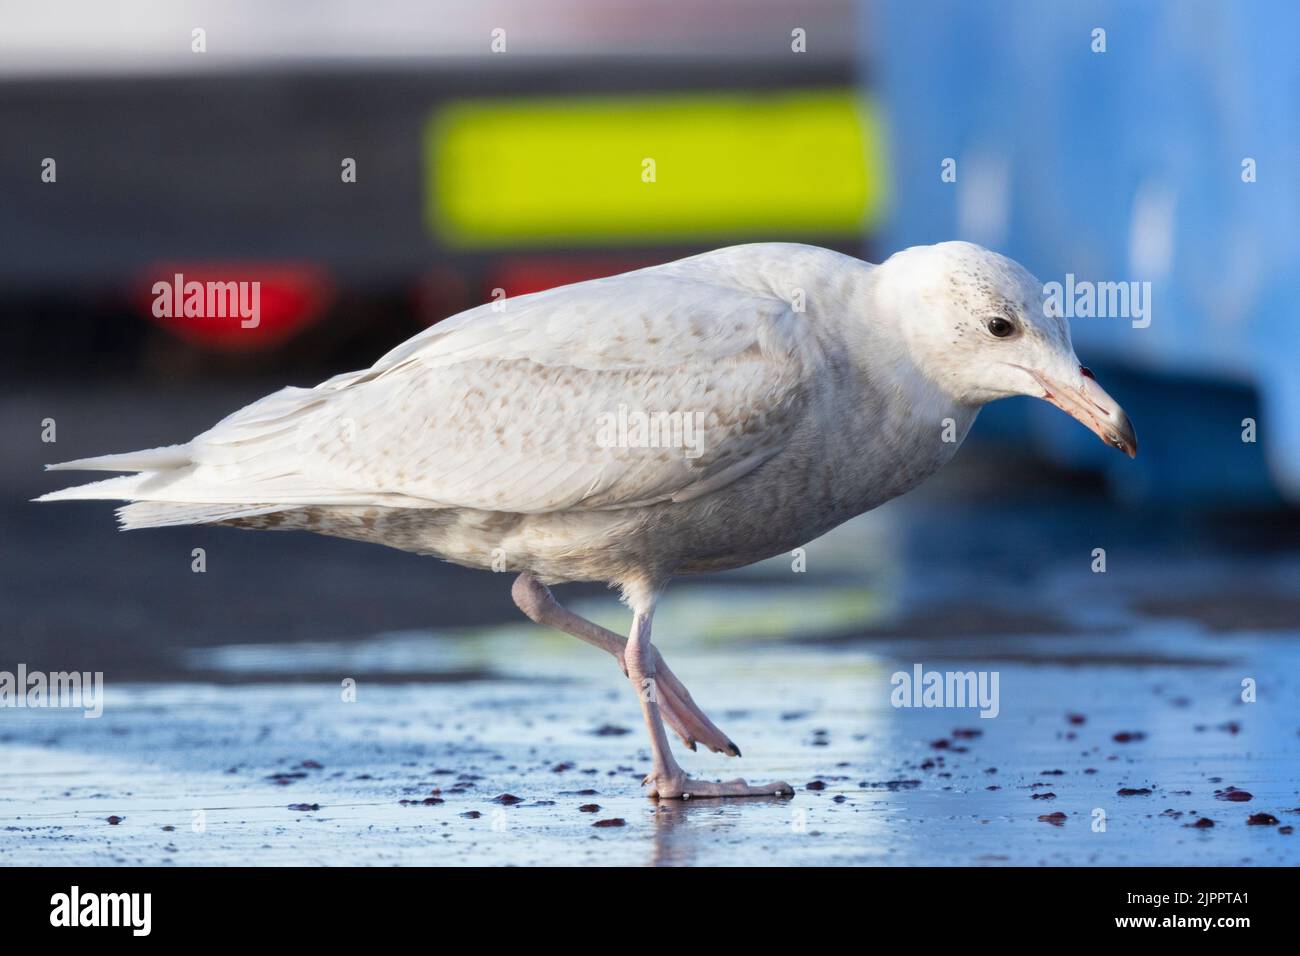 Glaucous Gull (Larus hyperboreus leuceretes), side view of a juvenile standing on the ground, Western Region, Iceland Stock Photo